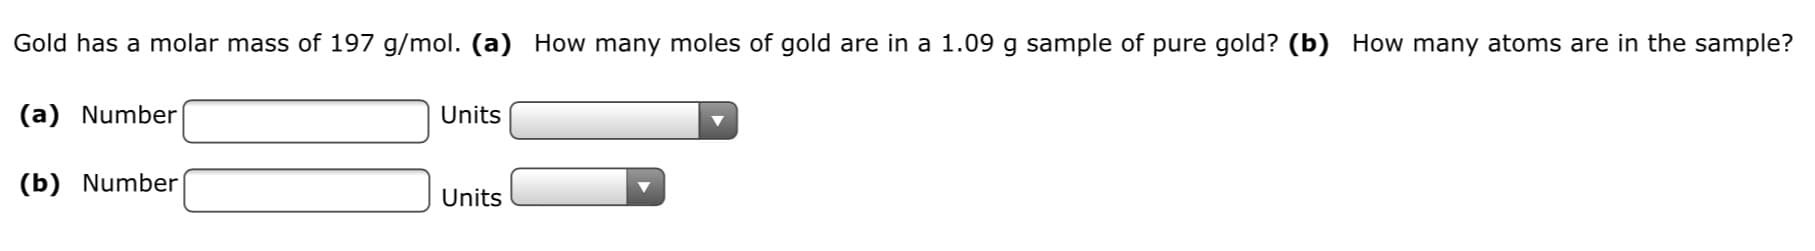 Gold has a molar mass of 197 g/mol. (a) How many moles of gold are in a 1.09 g sample of pure gold? (b) How many atoms are in the sample?
(a) Number
Units
(b) Number
Units
